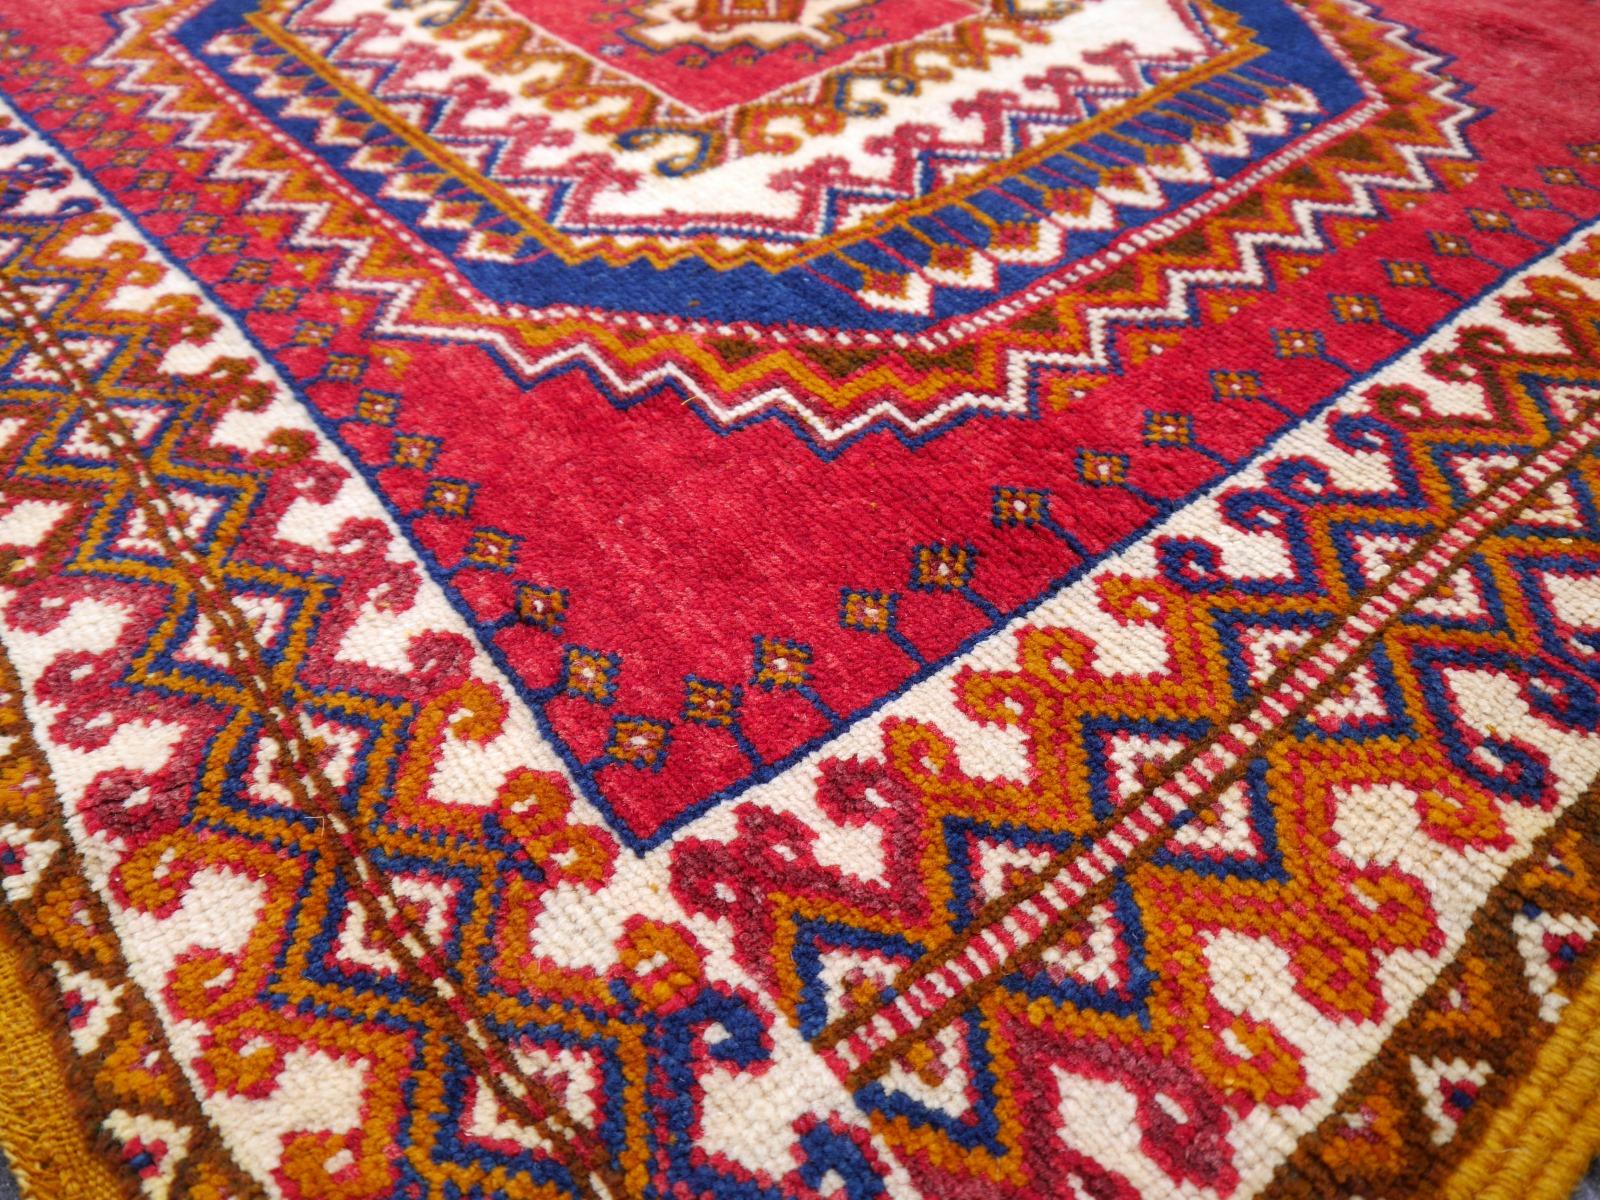 Late 20th Century Vintage North African Berber Tribal Rug Ait Khozema from Morocco For Sale